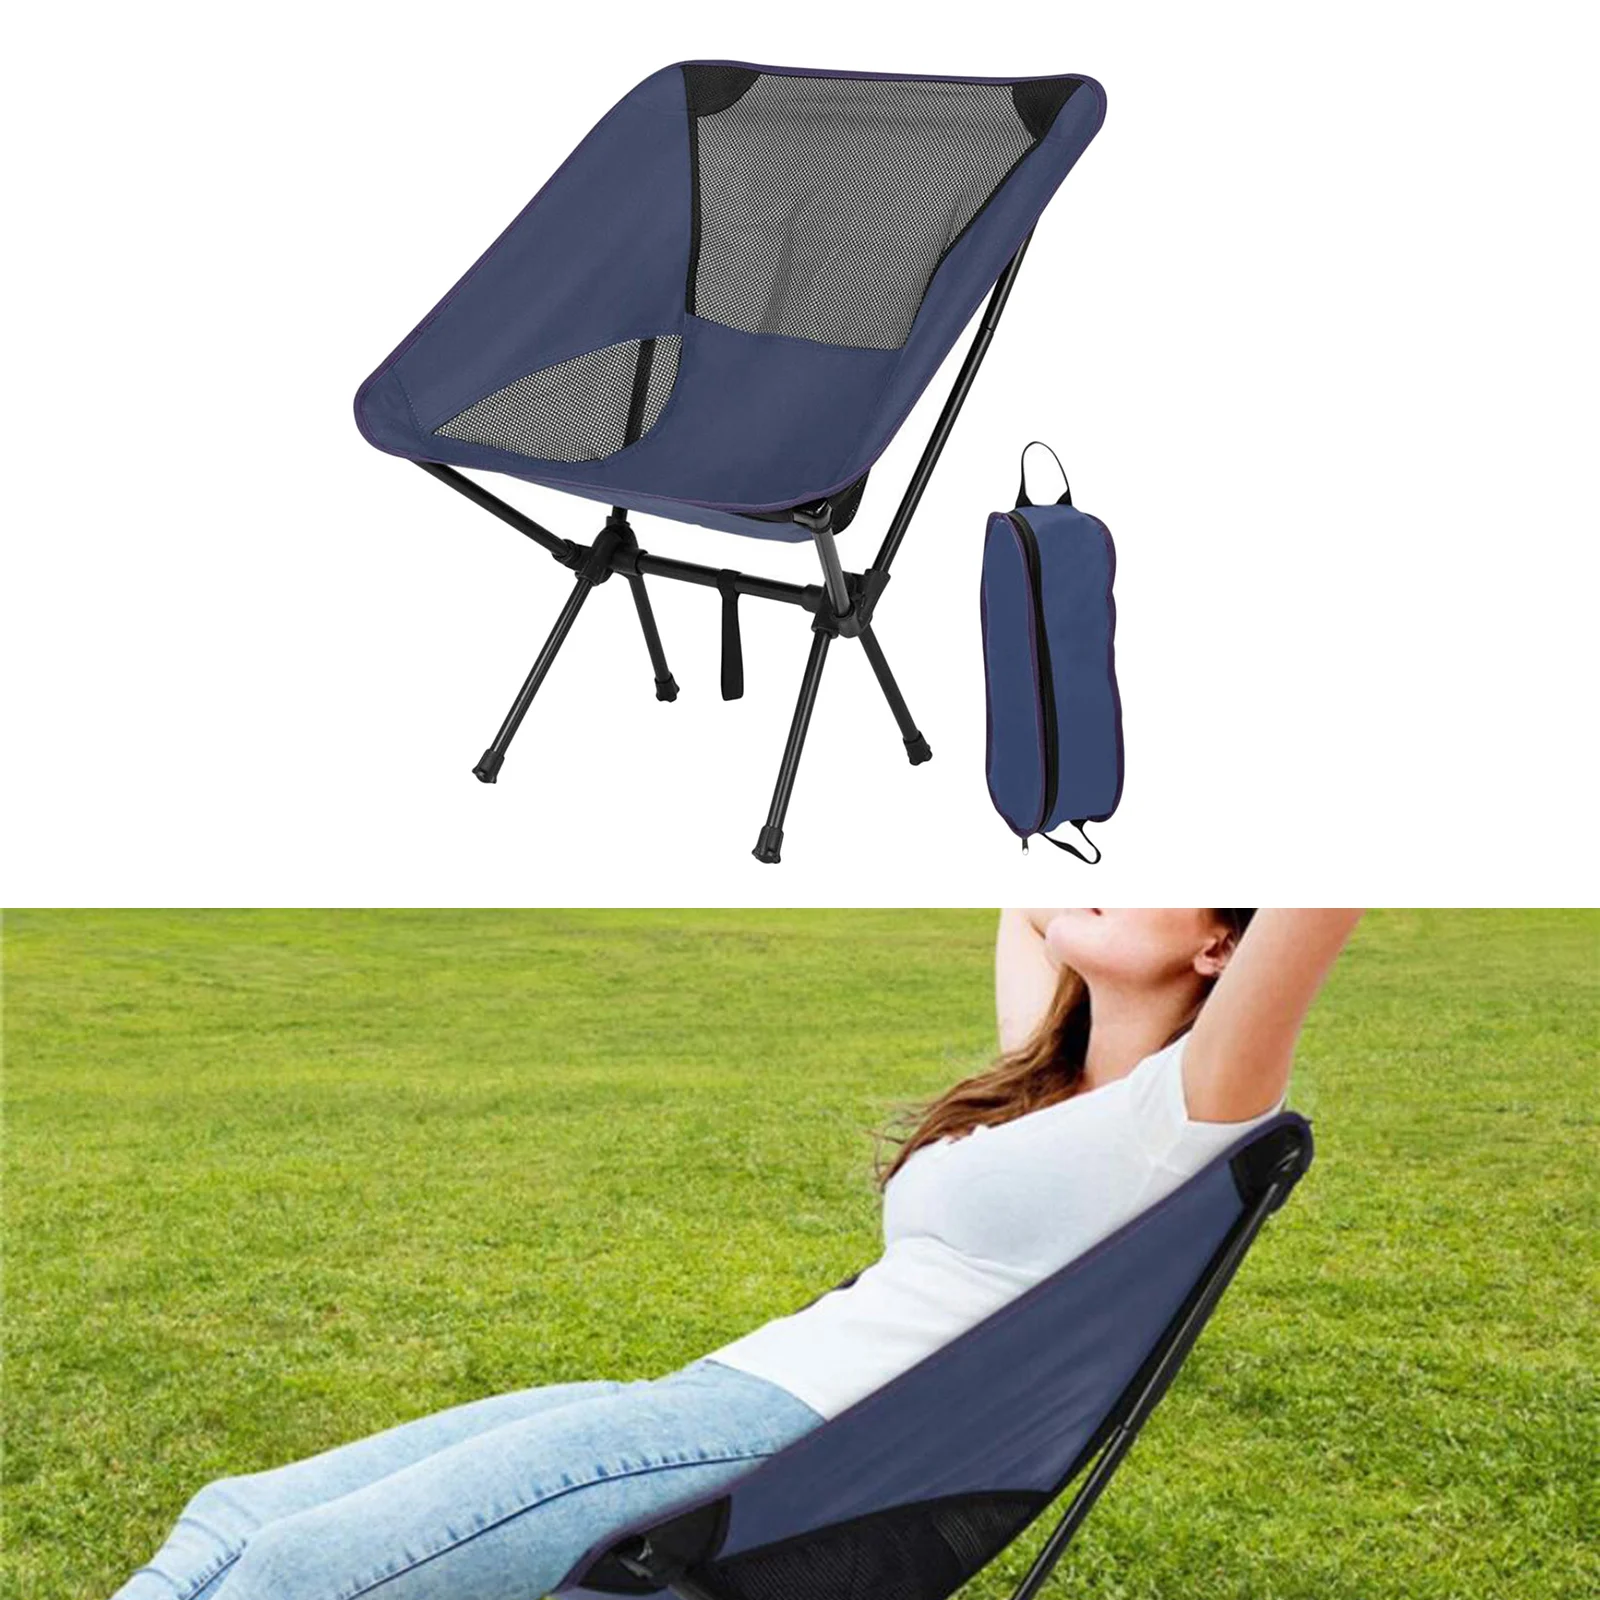 Portable Folding Chair Camping Fishing Stool Outdoor Travel Beach Seat